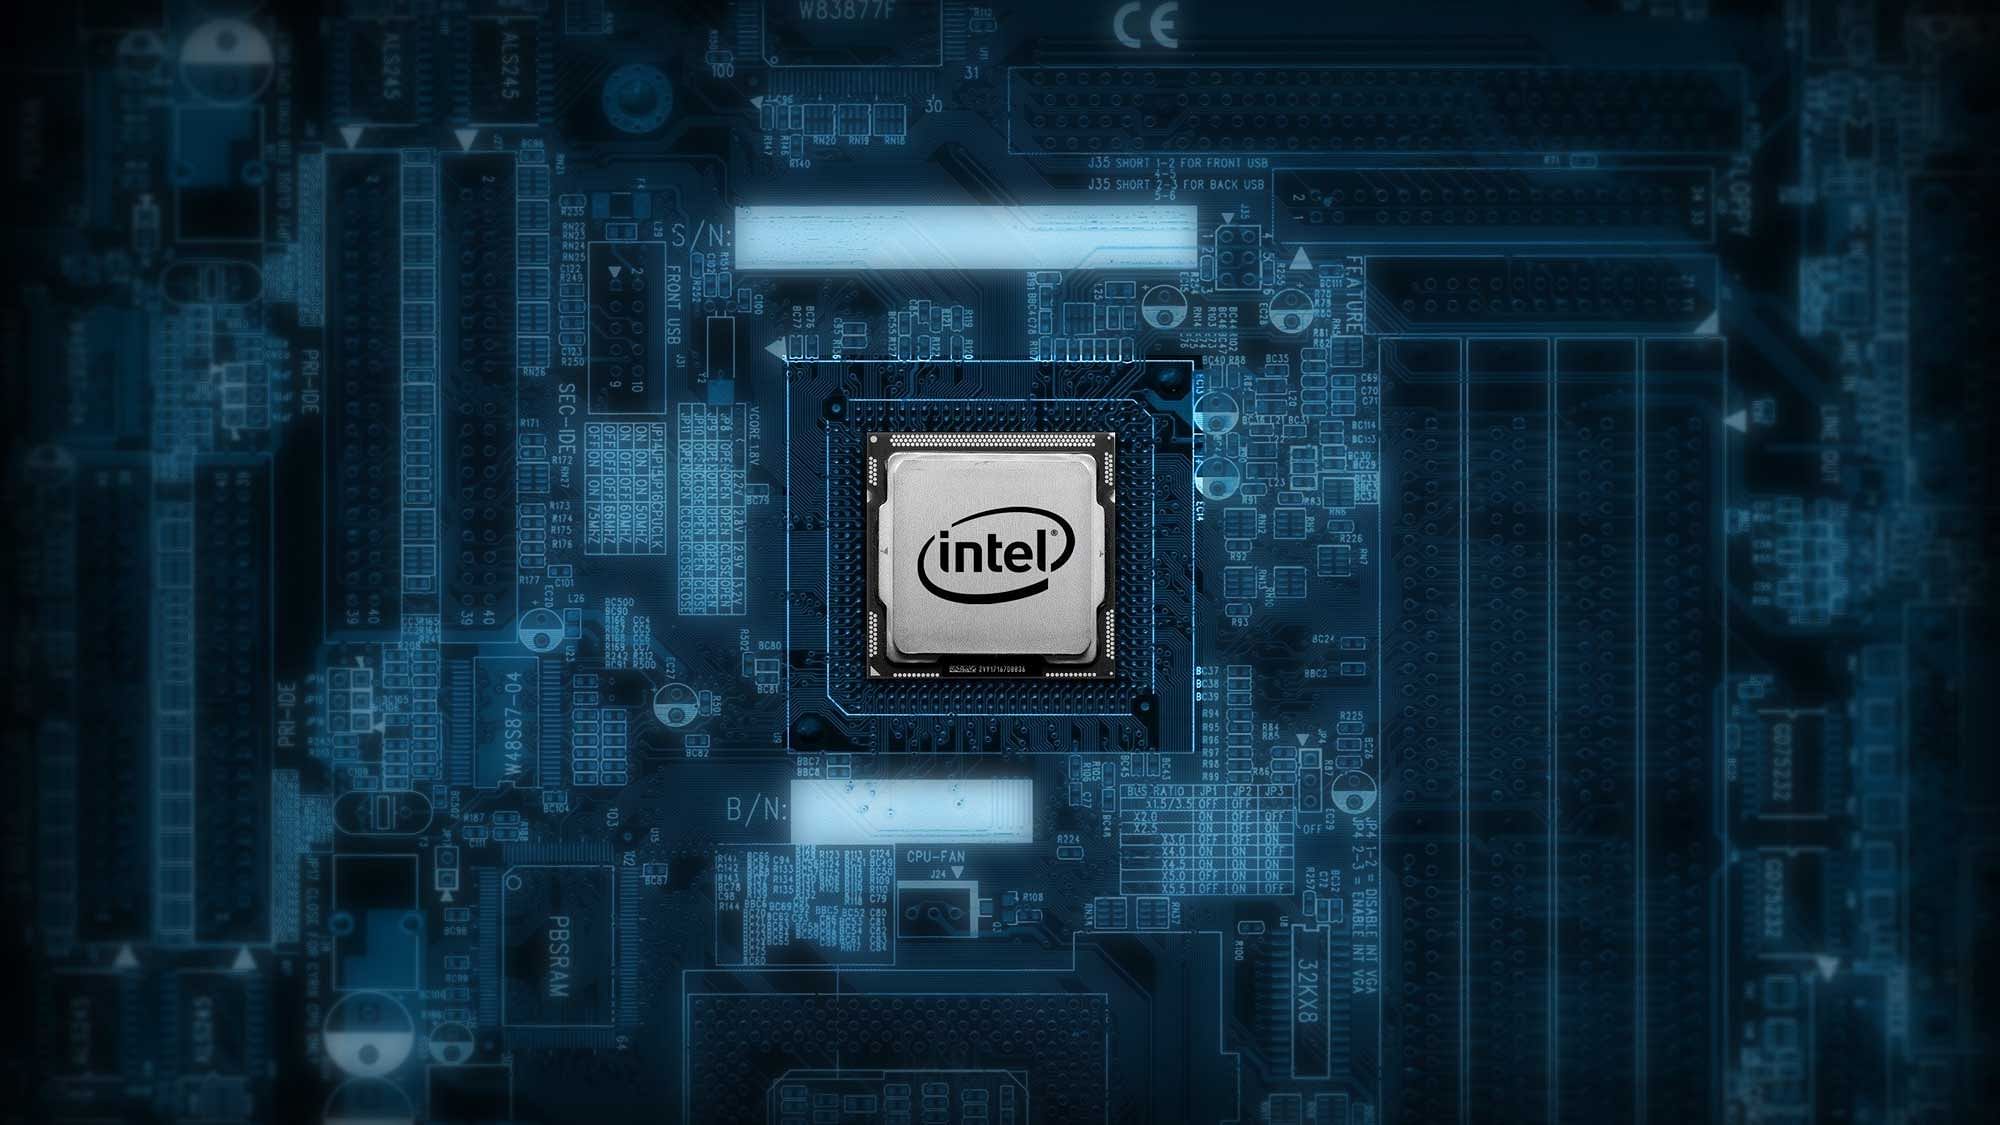 Intel Chipset on a Motherboard. (Photo Courtesy: Intel)